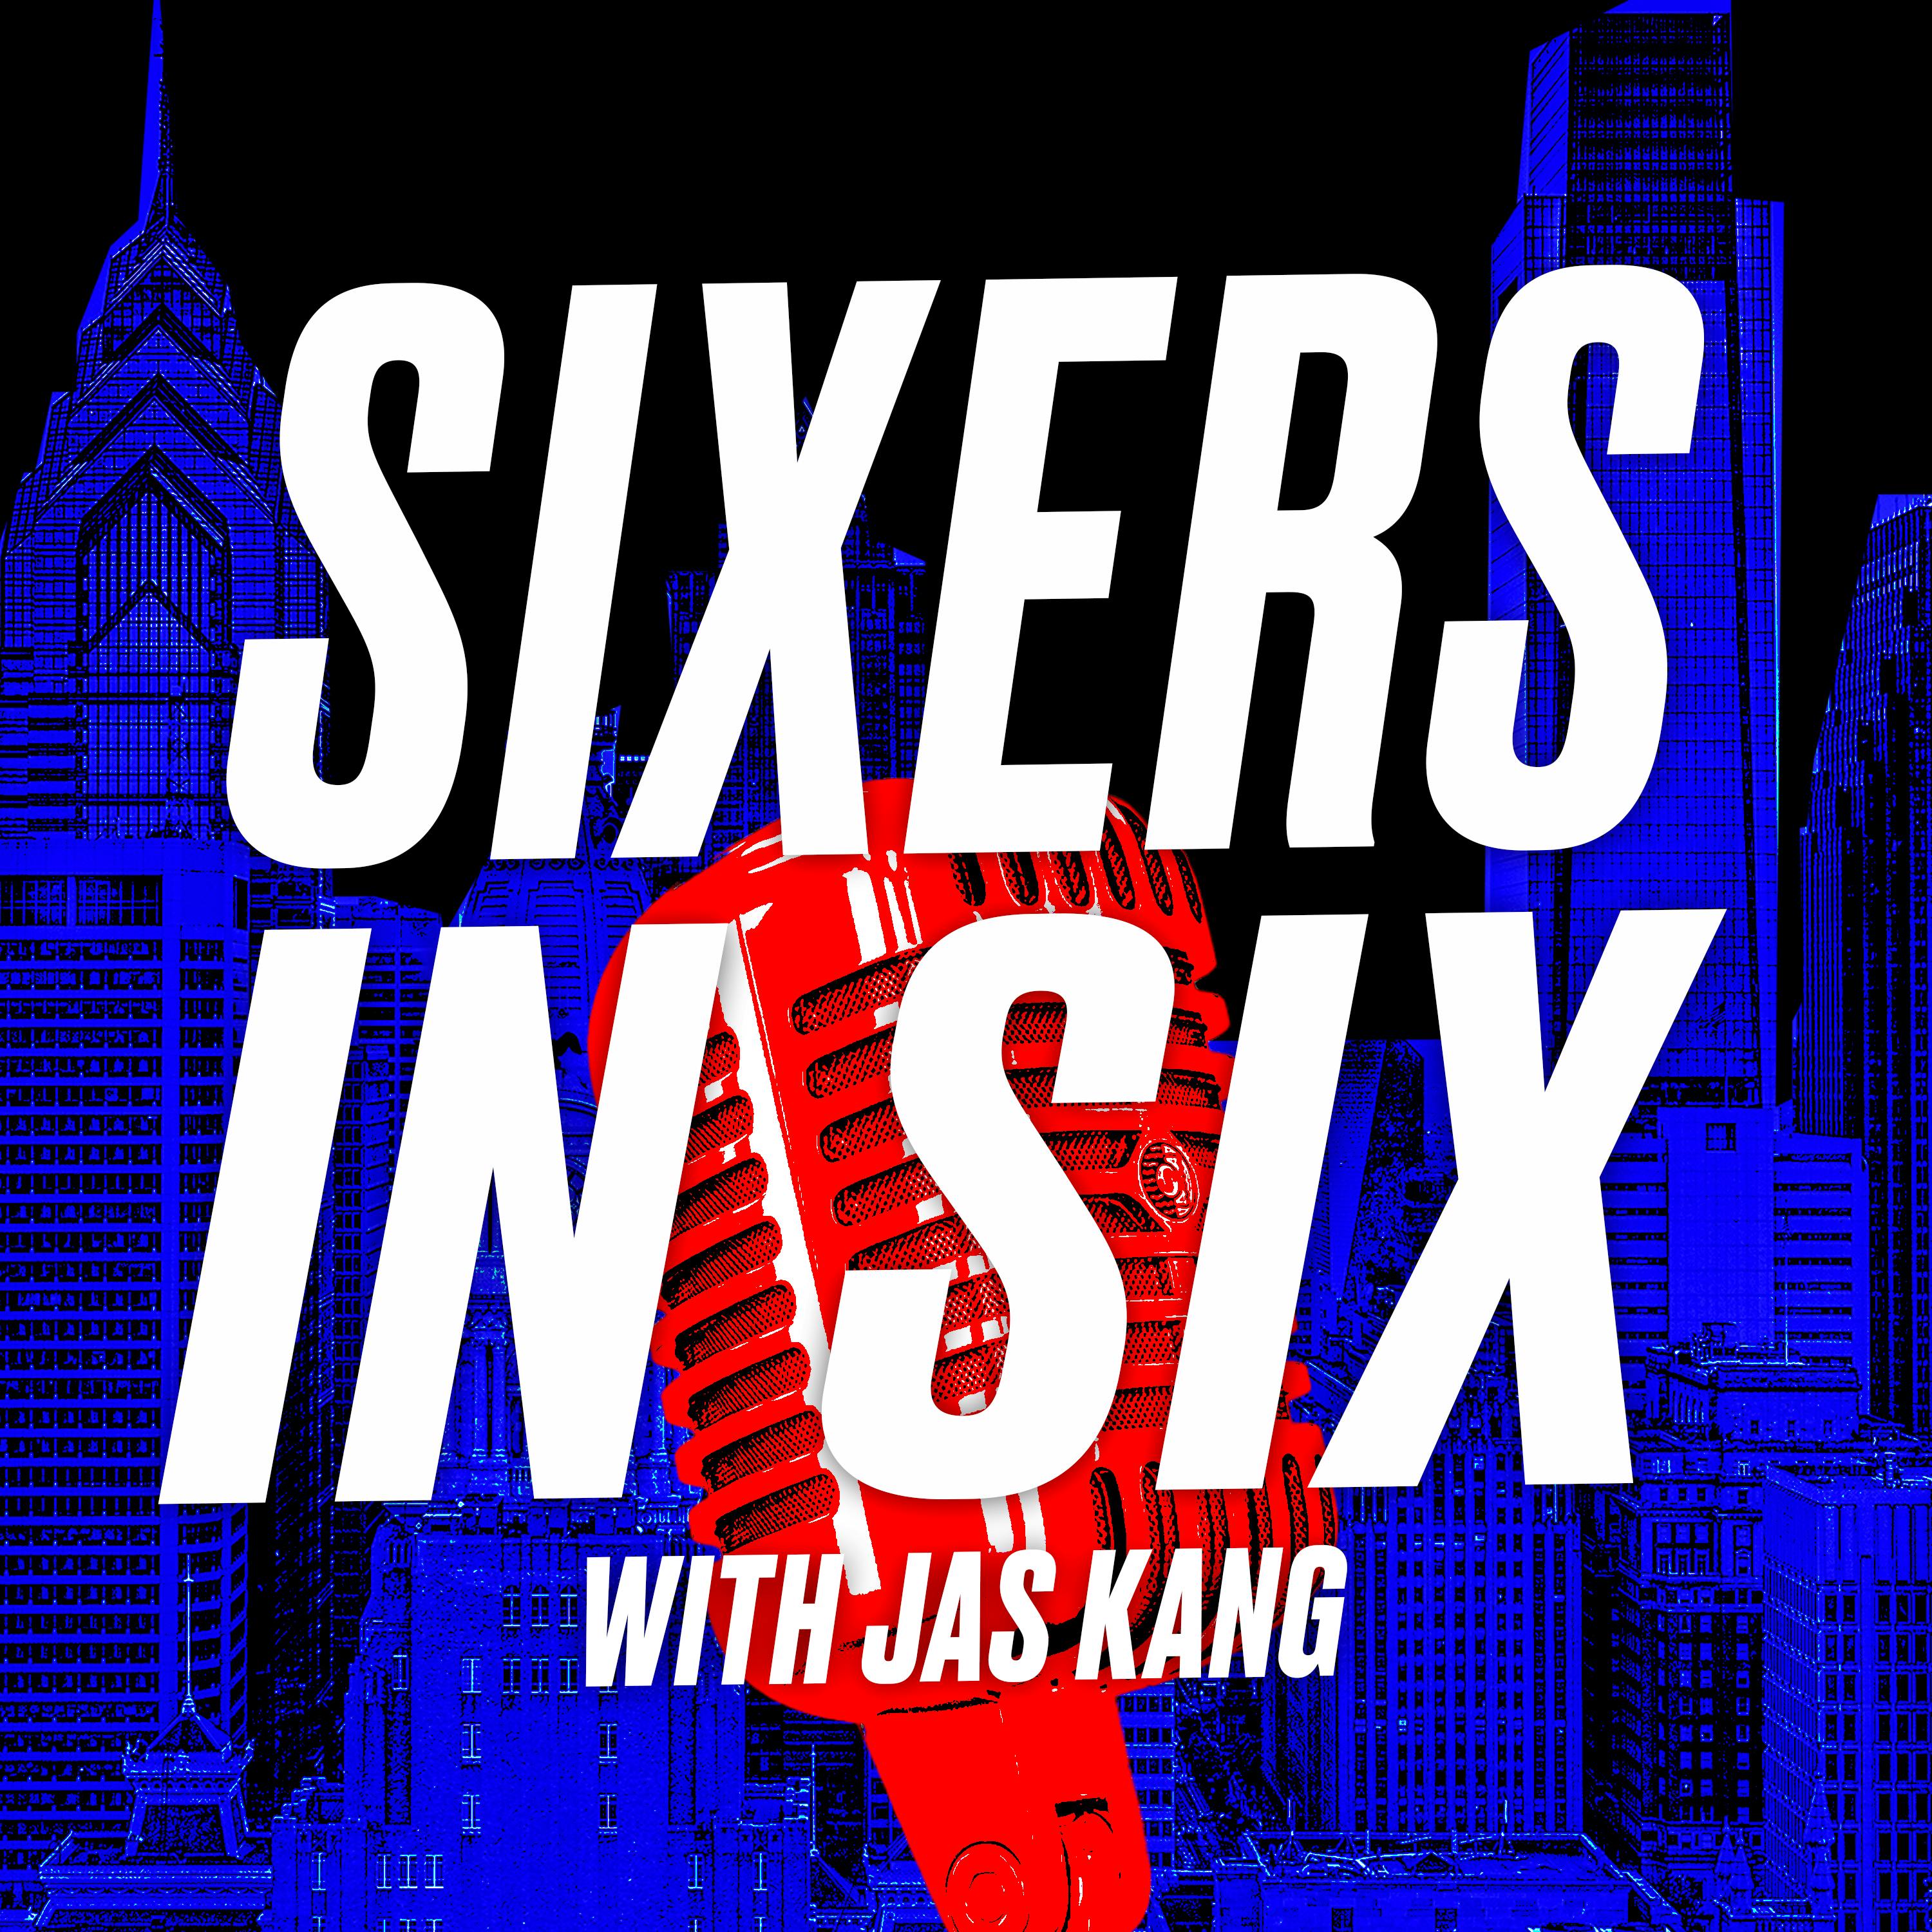 Sixers in Six: A new short podcast giving a beat reporter style glimpse into the 76ers. With Jas Kang.